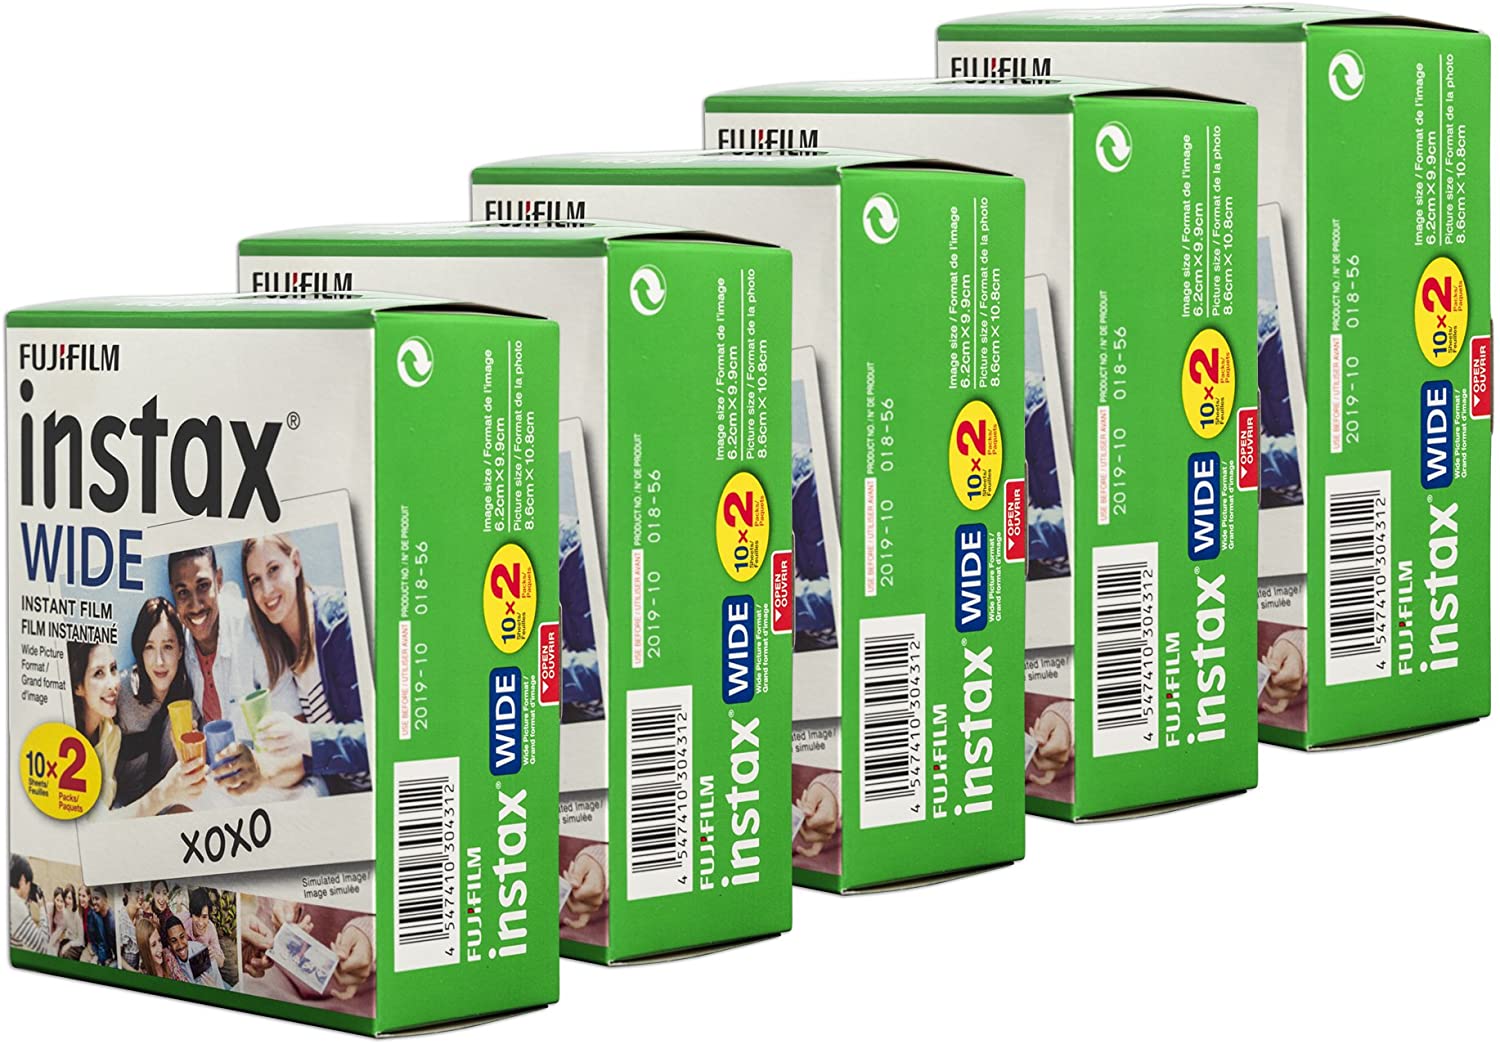 FUJIFILM wide film INSTAX WIDE K5 - 20 sheets x 5 boxes (100 sheets)